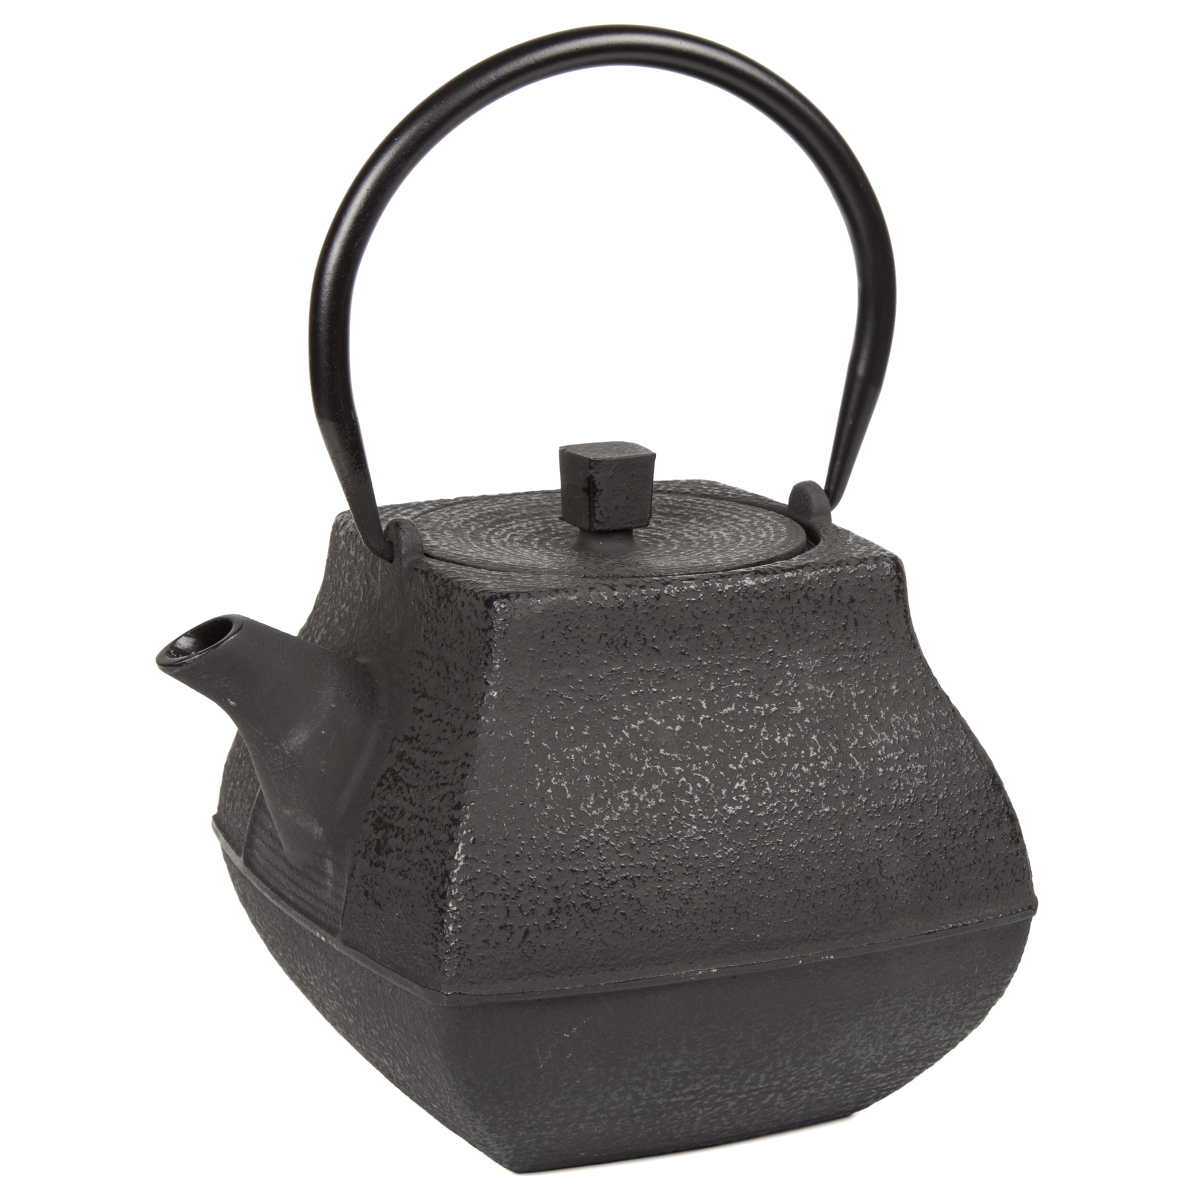 Picture of Creative Home  73504 Creative Home 47 oz Cast Iron Tea Pot with Stainless Steel Infuser Basket, Black Color